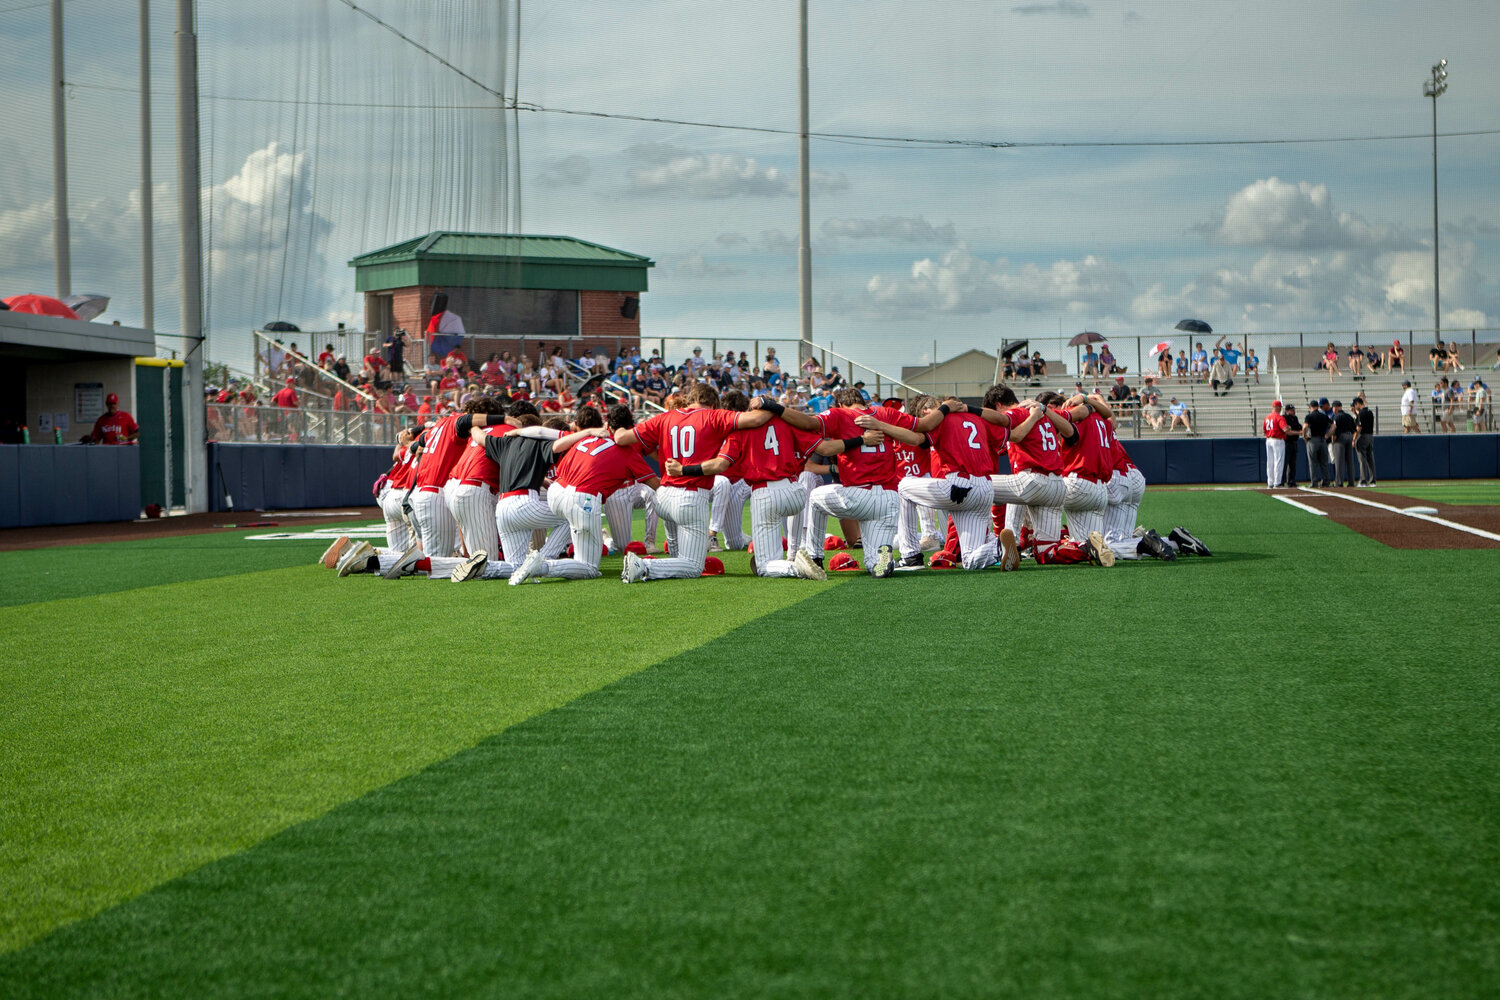 Katy circles up after the sweep of Tompkins in the regional quarterfinals.